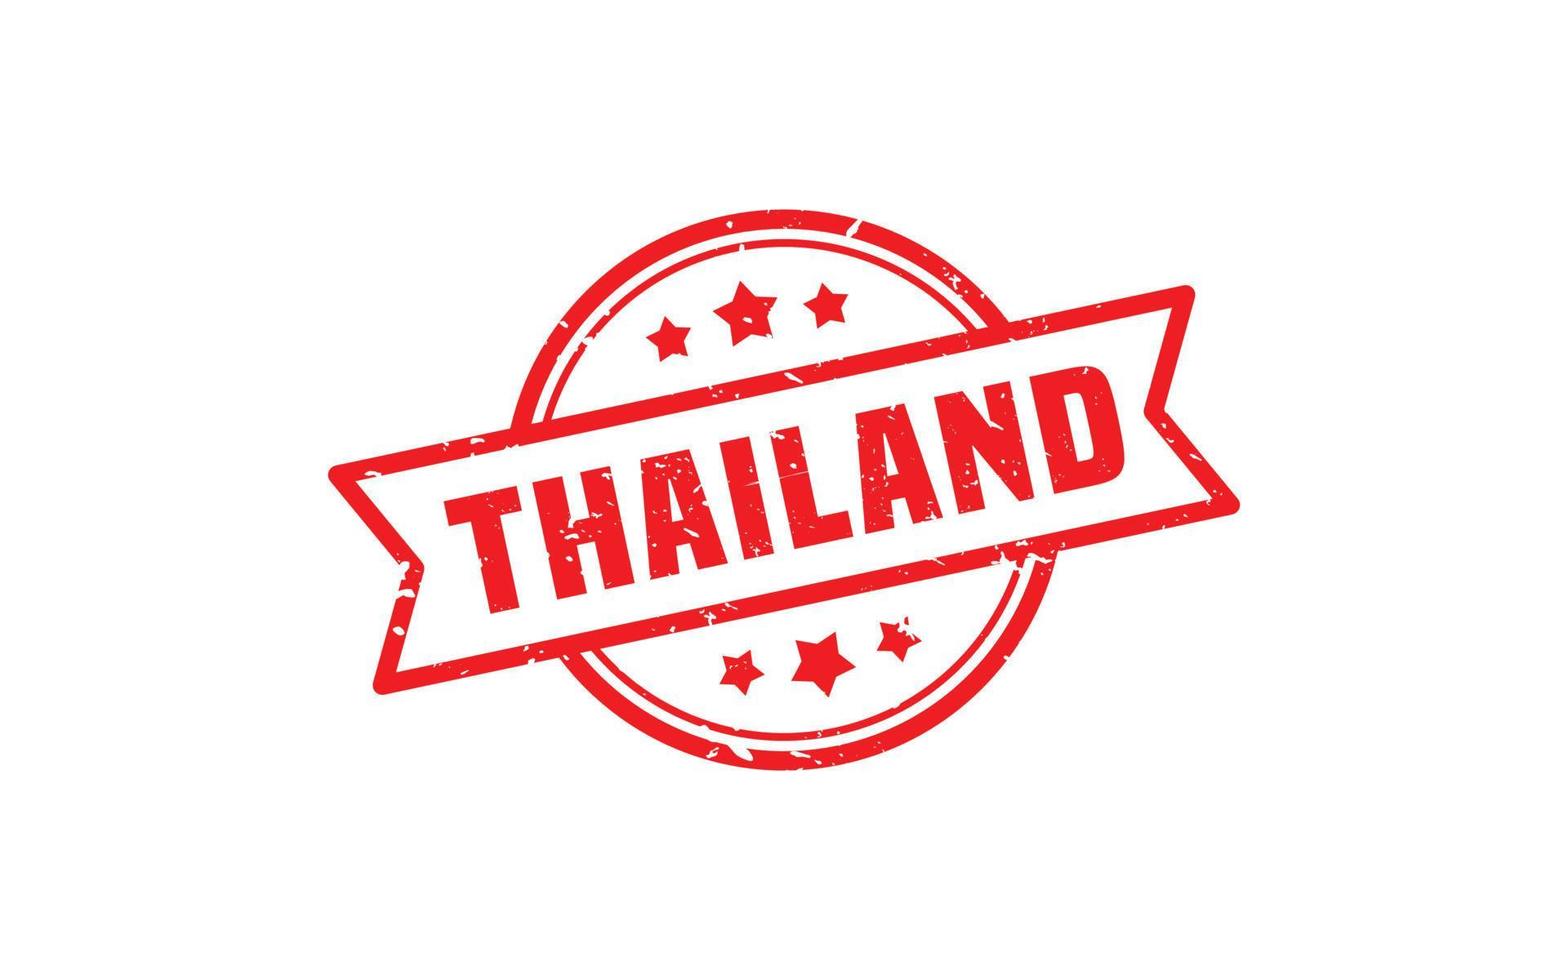 THAILAND rubber stamp with grunge style on white background vector